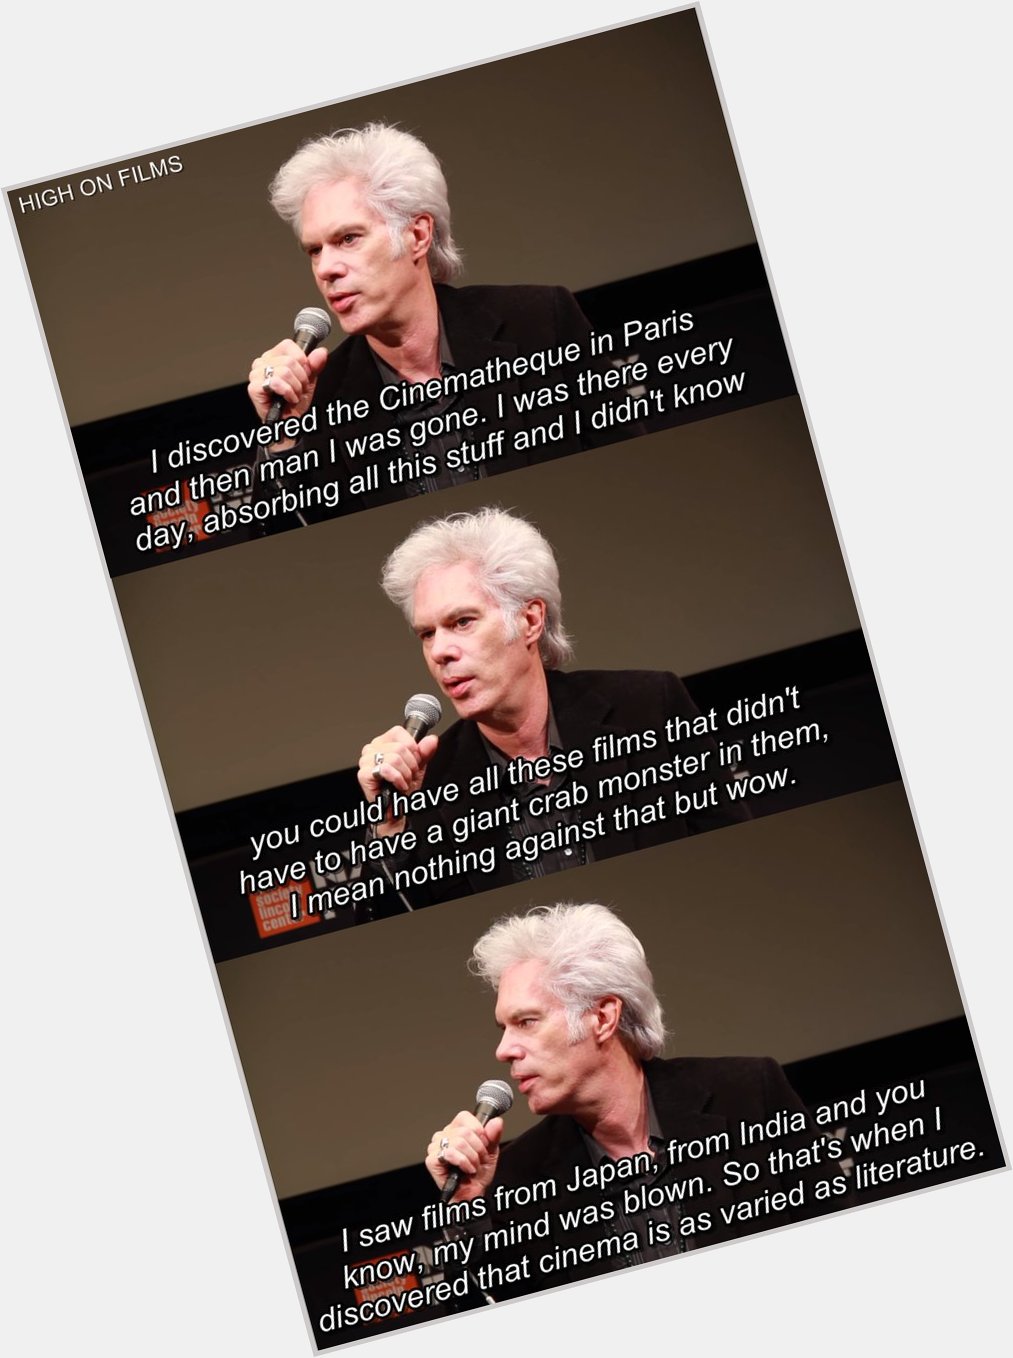 Jim Jarmusch on discovering Independent & Art-House Cinema for the first time.

Happy Birthday, Jim! 